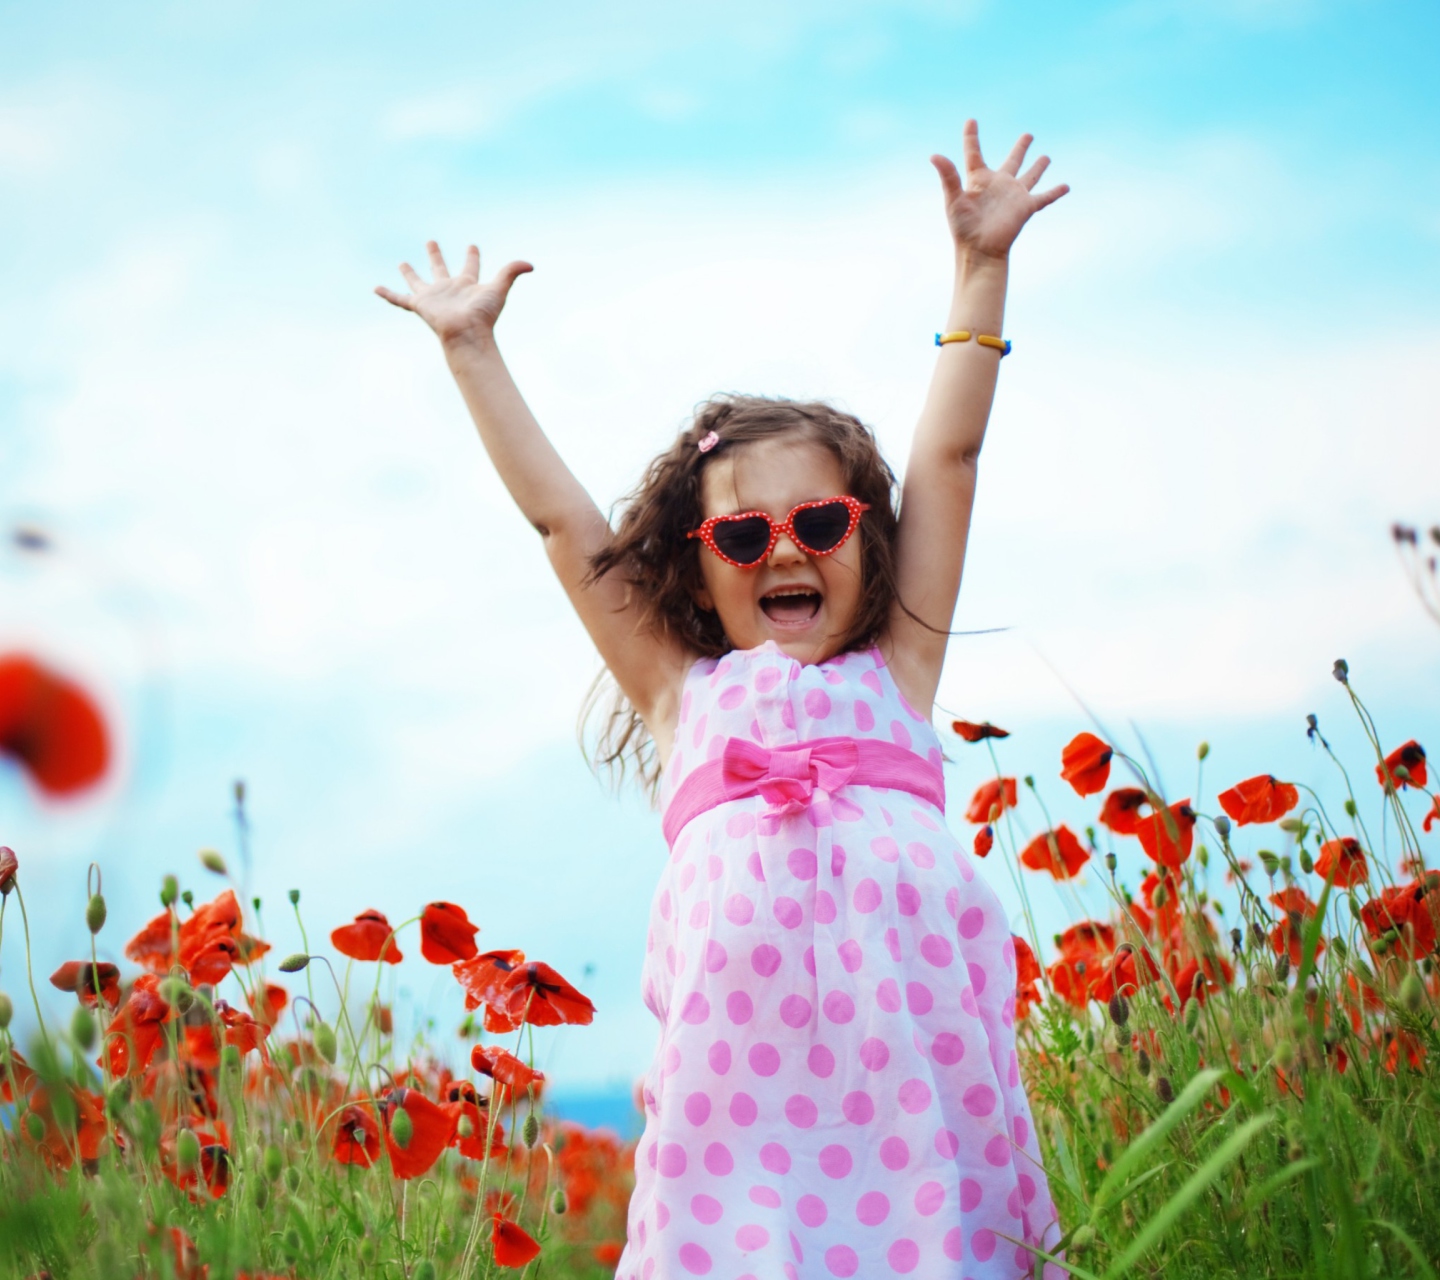 Happy Little Girl In Love With Life wallpaper 1440x1280